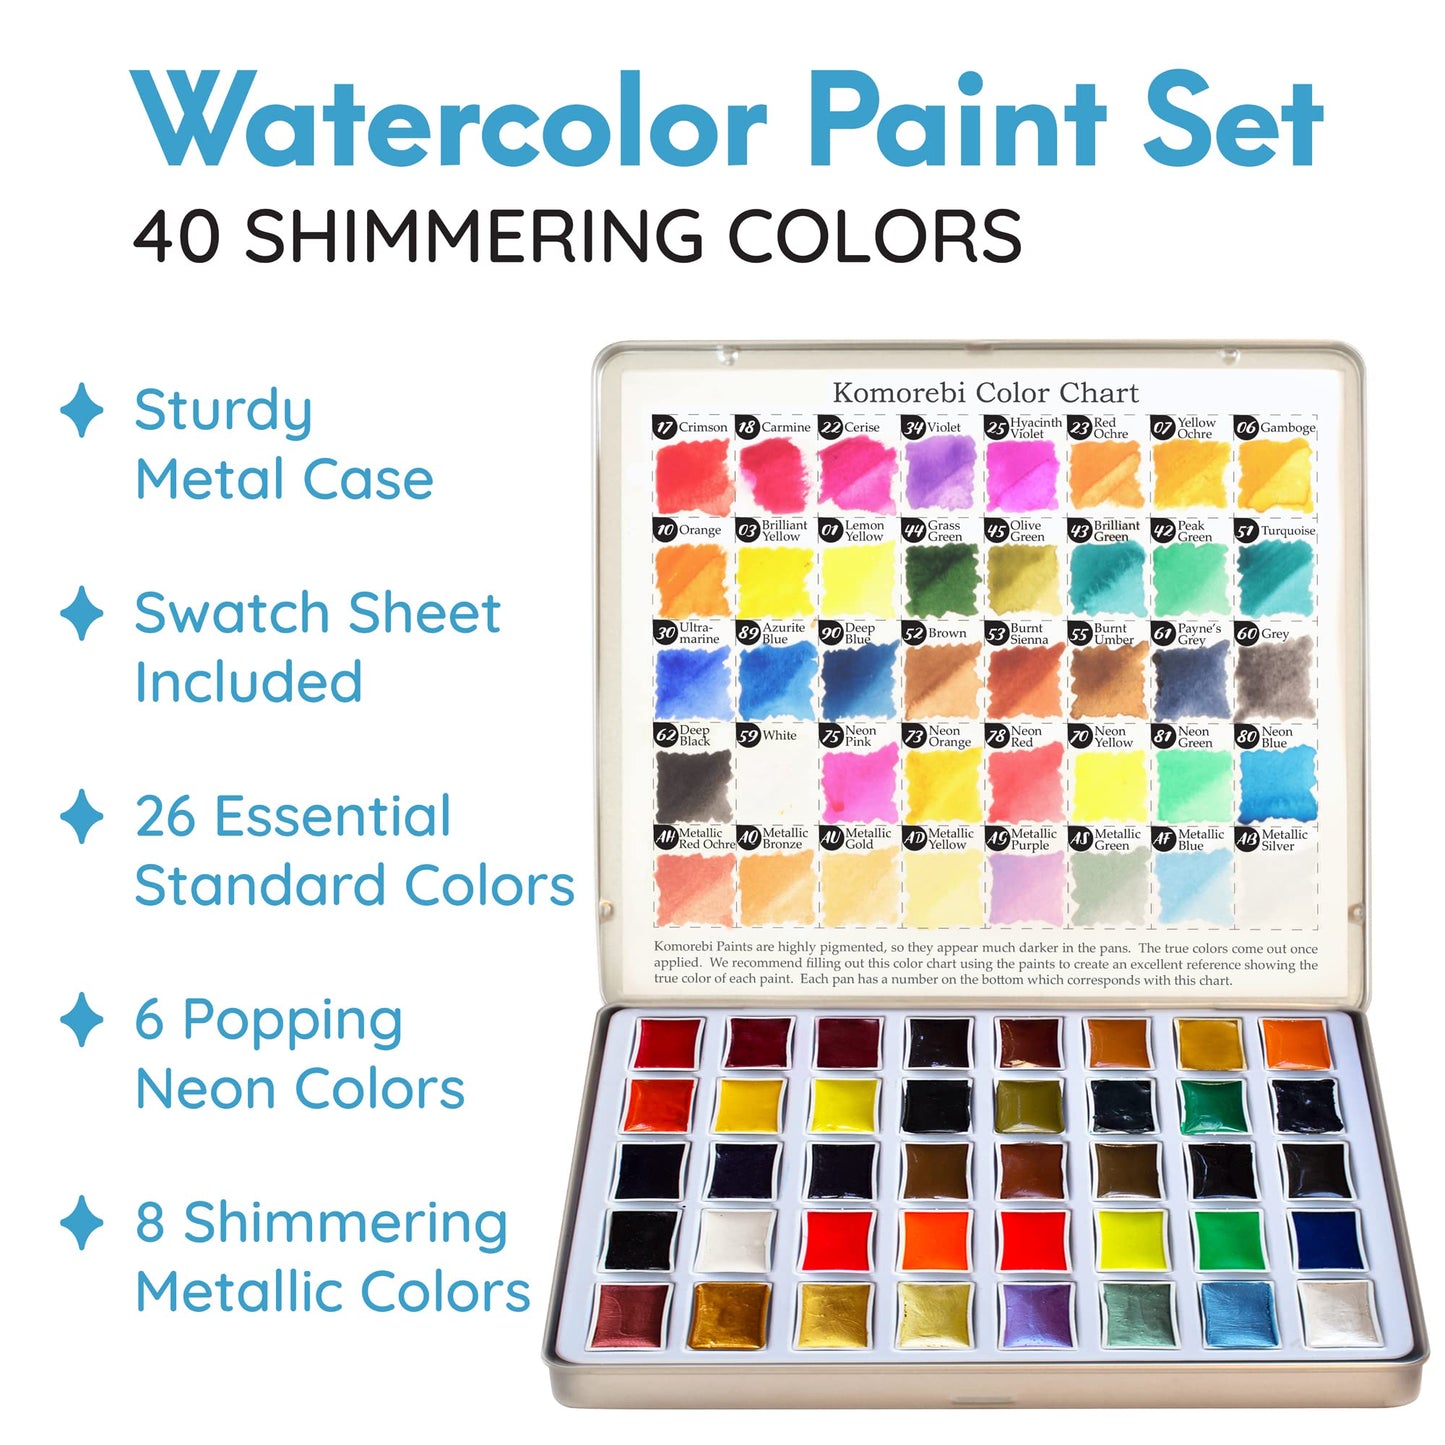 SITOANTD Watercolor Paint Set, 50 Colors Water Color Set With Regular,  Metallic & Neon, Wood Case Water Color Paint Sets For Kids, Great Watercolor  Set For Watercolor Painting Beginner And Adult 